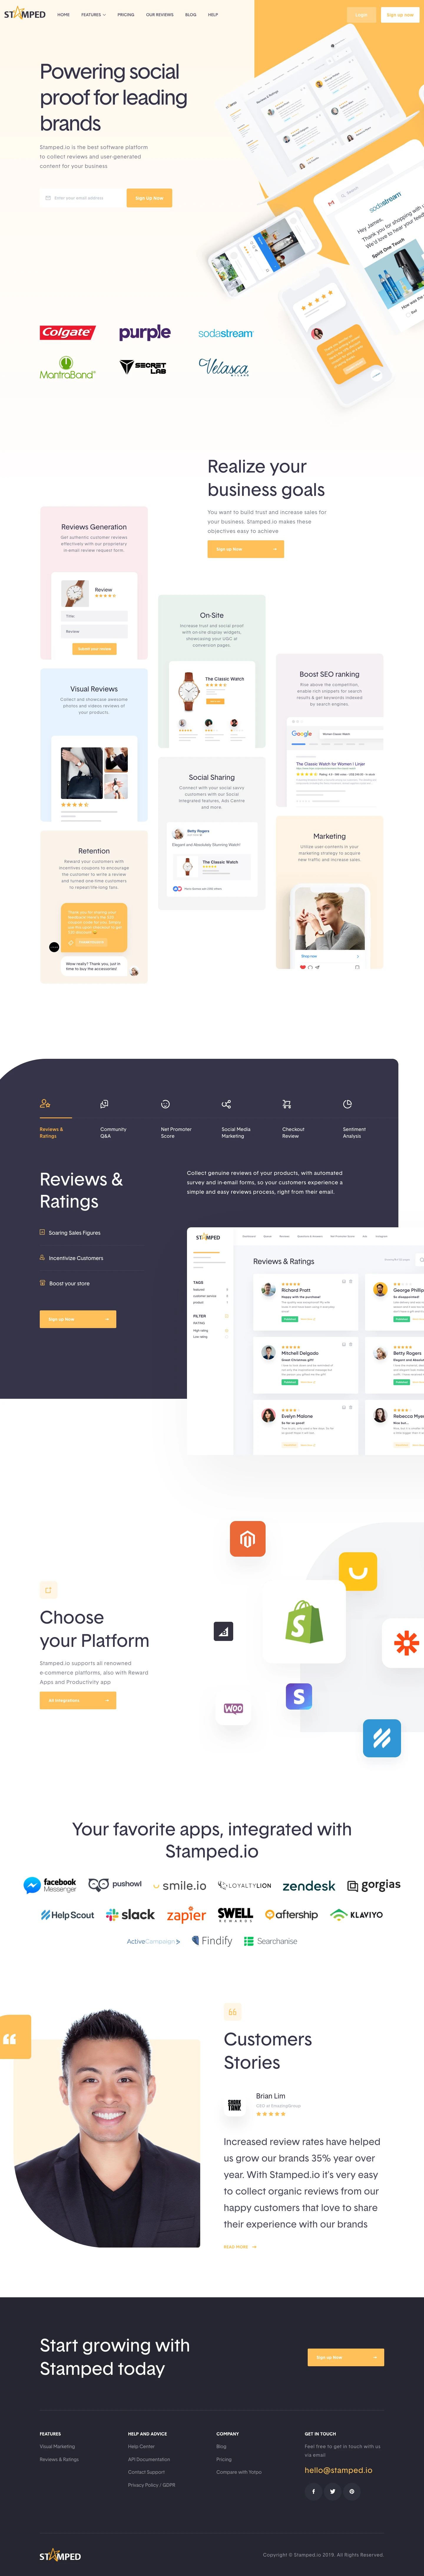 Stamped.io Landing Page Example: Powering social proof for leading brands, Stamped.io is the best software platform to collect reviews and user-generated content for your business.